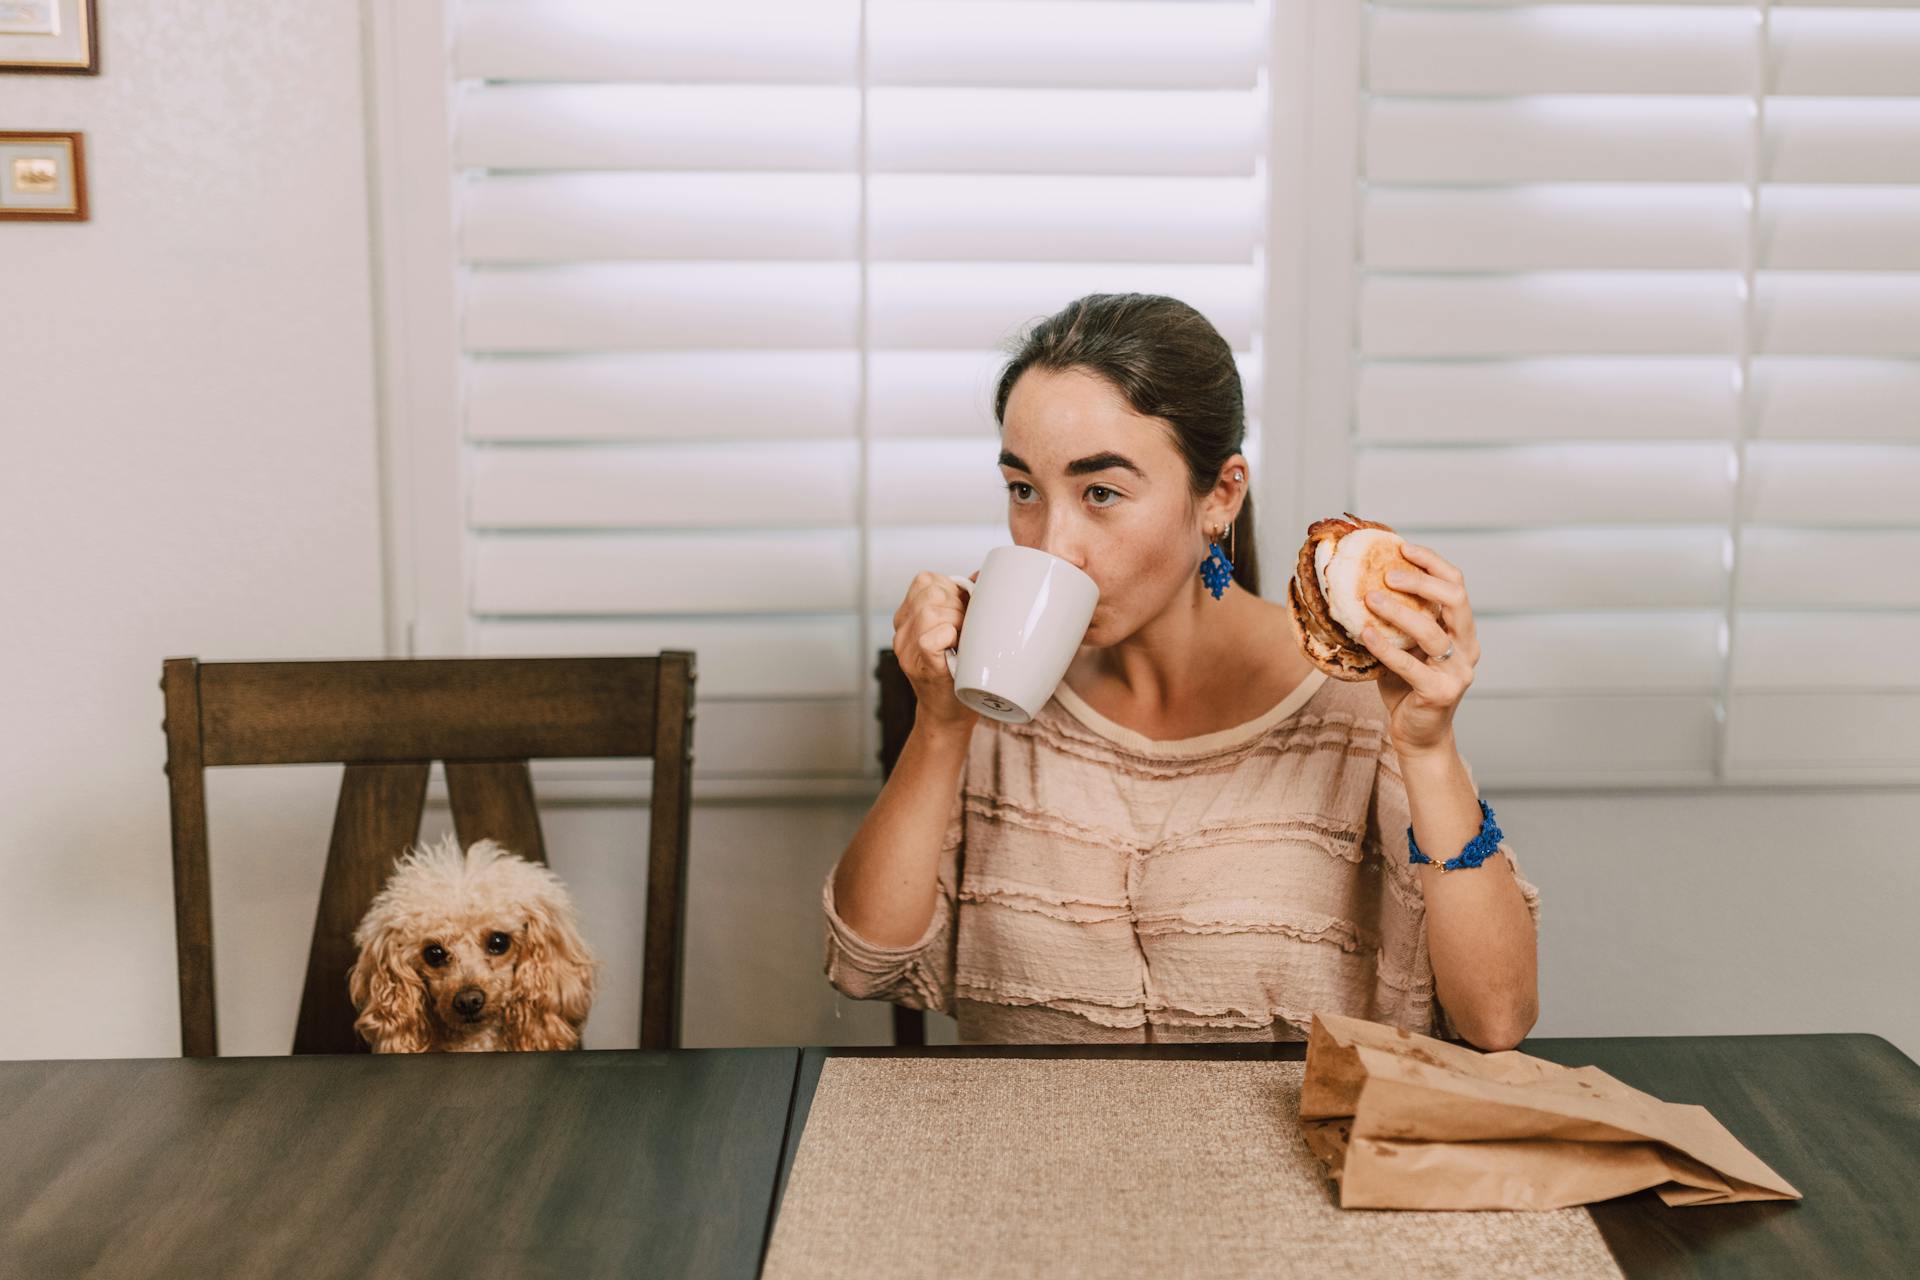 A woman eating a burger next to a puppy on a table